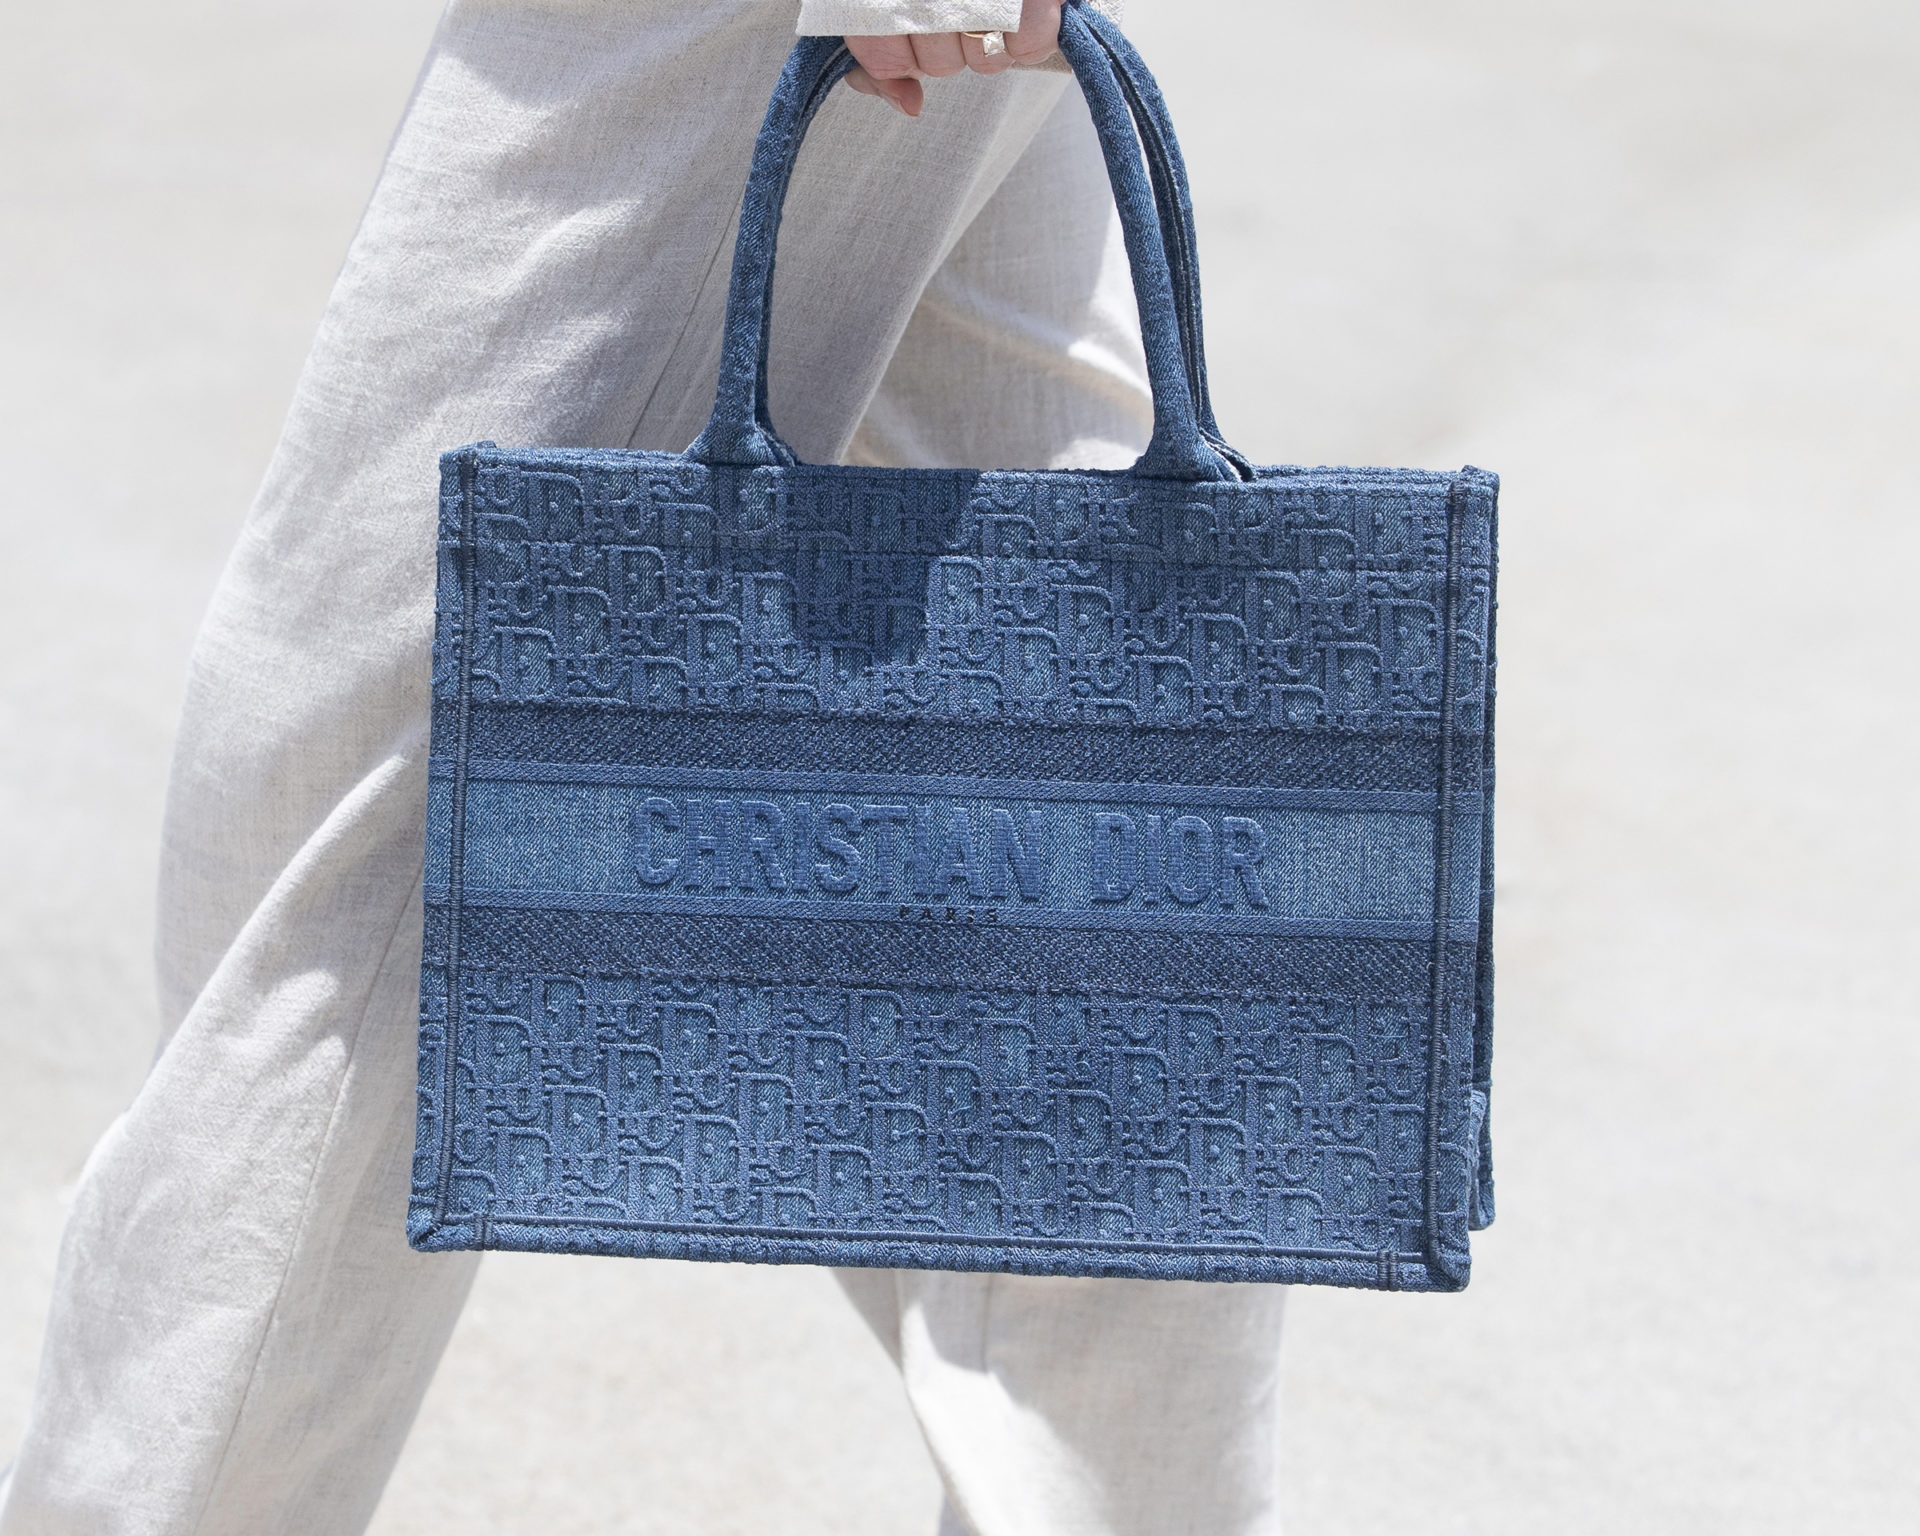 Best Designer Handbags For Moms: Stylish And Practical Choices